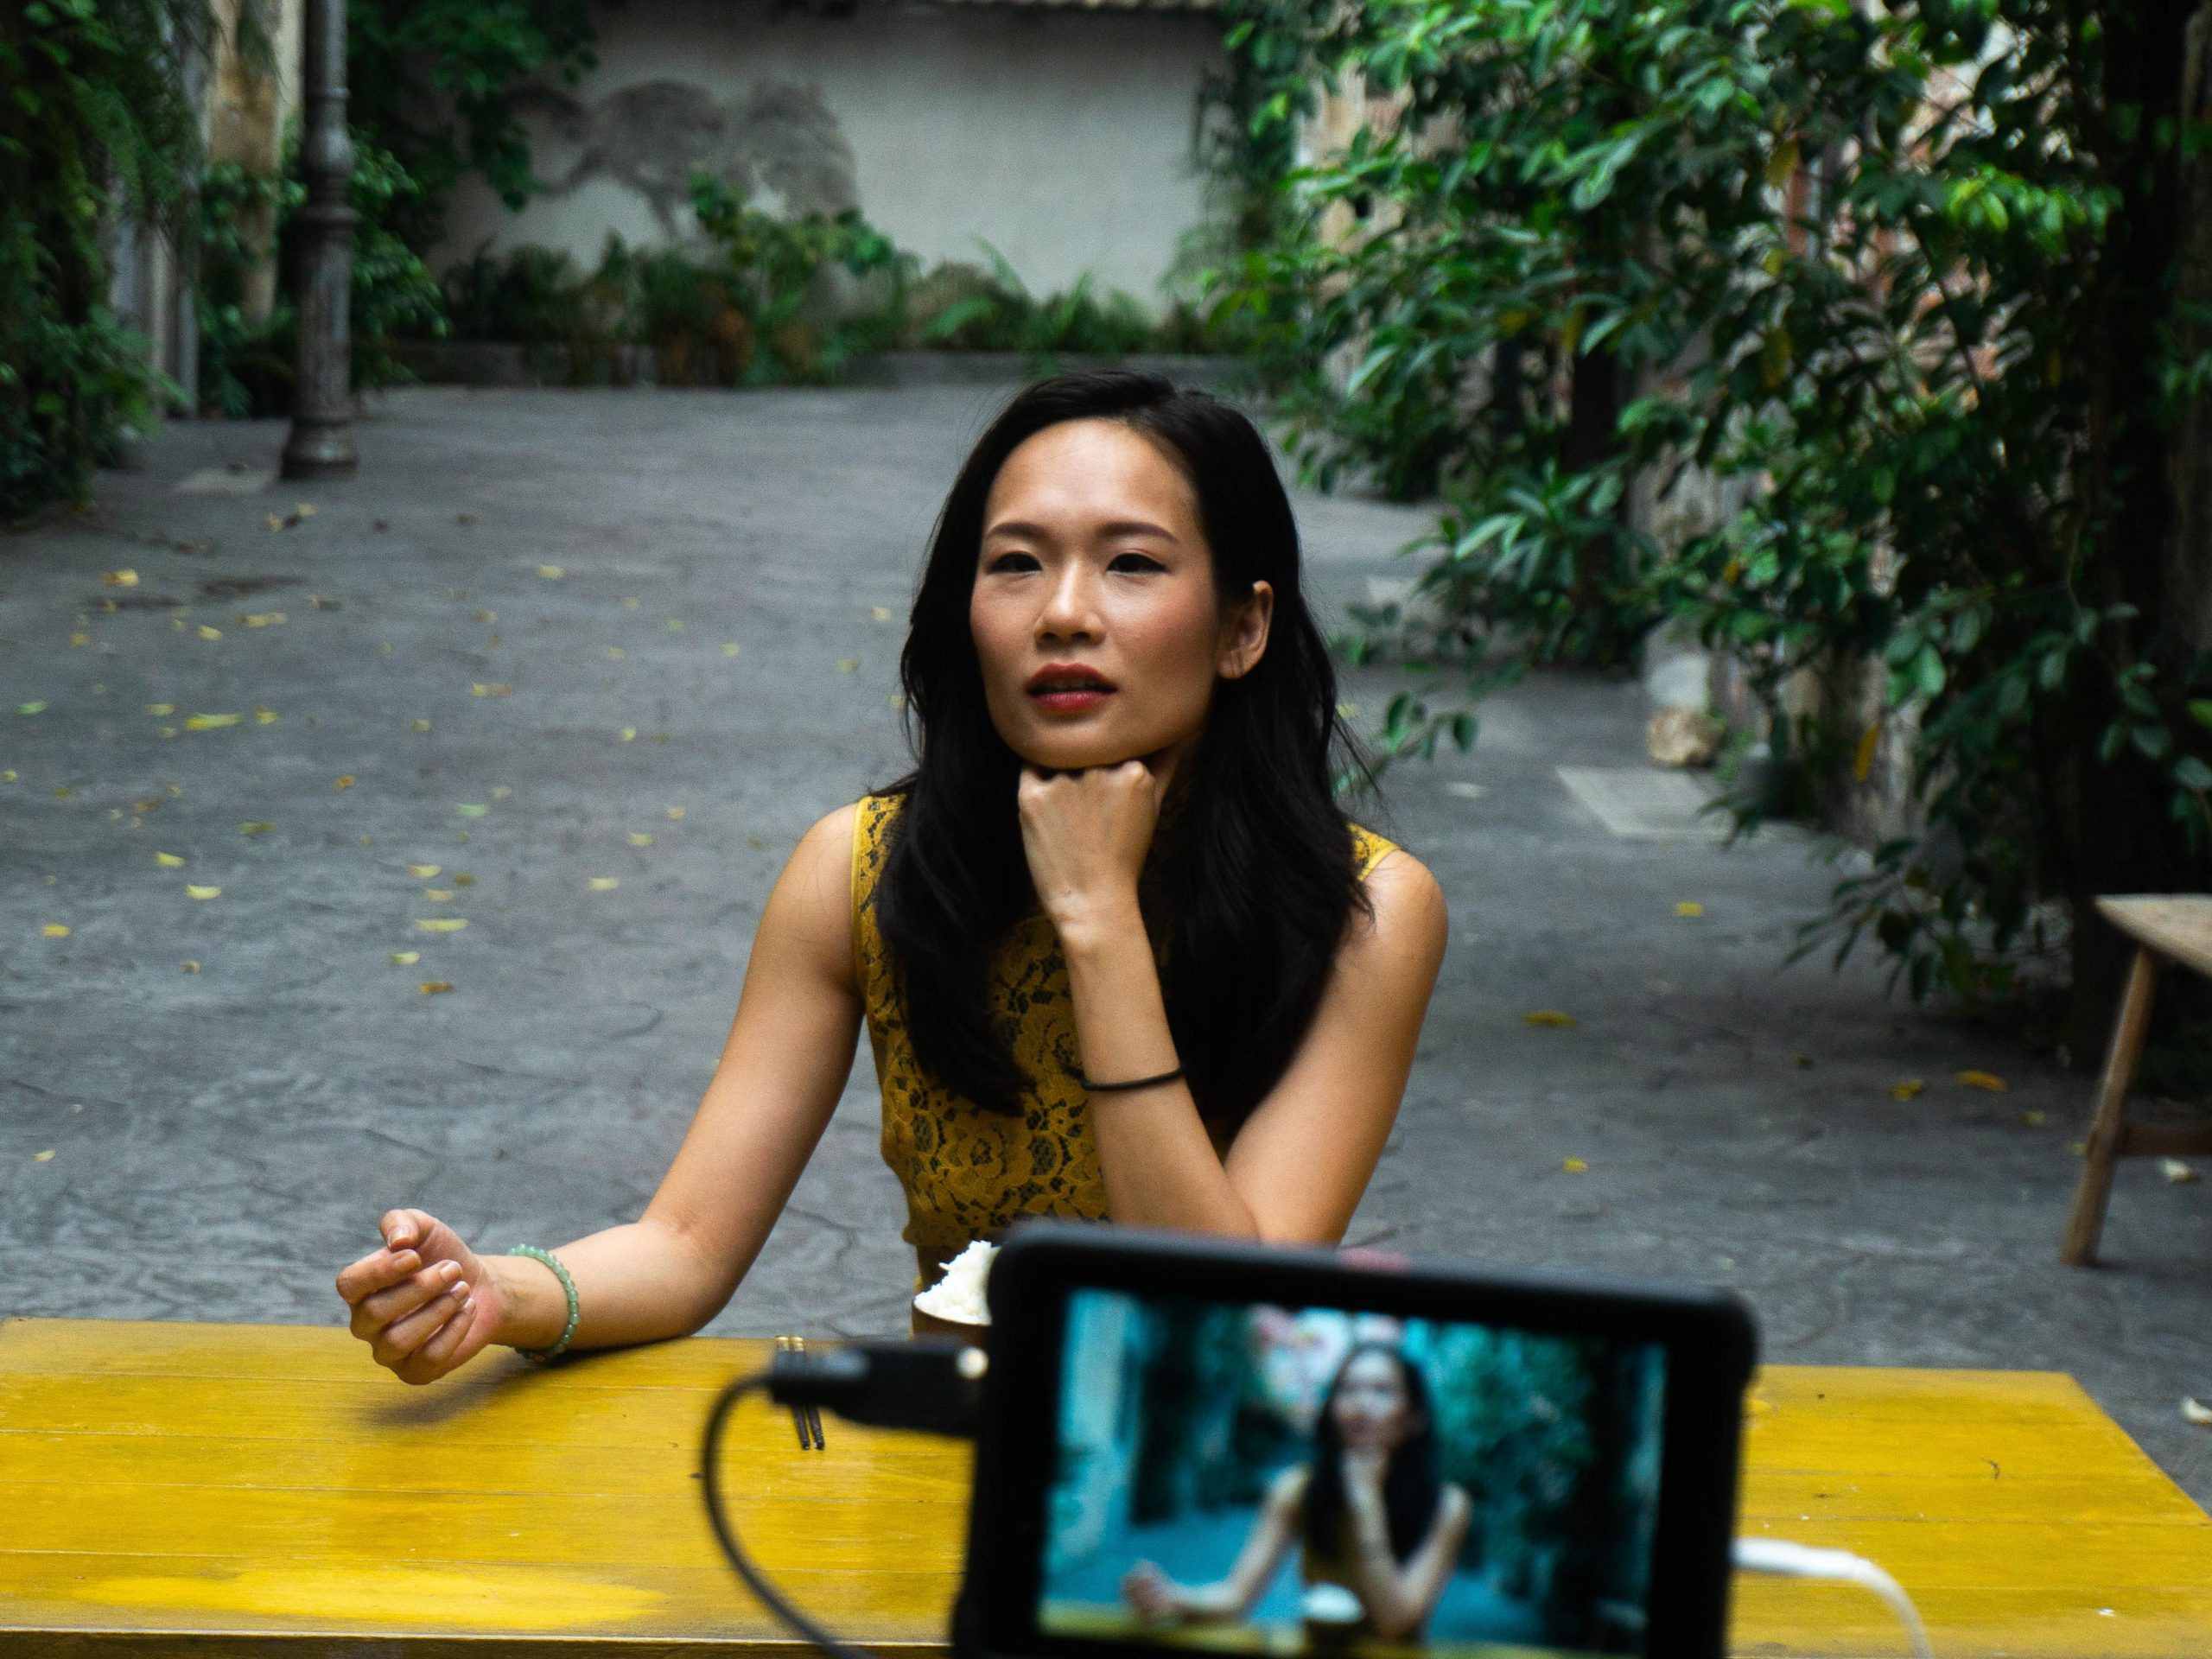 Amanda Ang as Connie, gazing into the distance, as a camera screen is seen in the foreground.